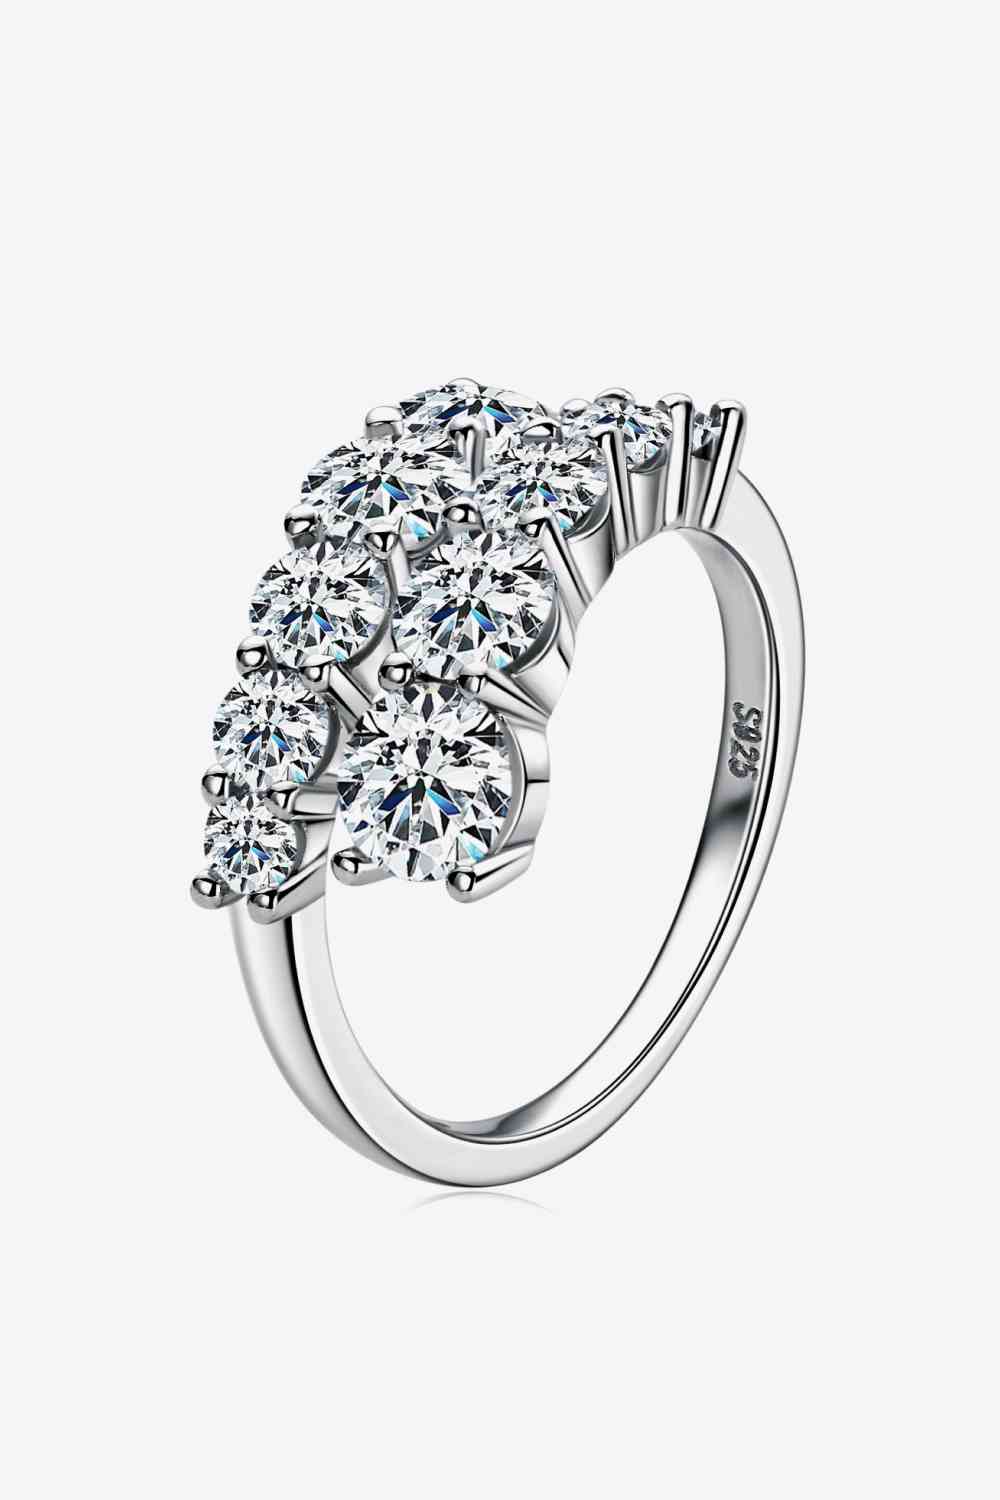 PREORDER- Adored Moissanite 925 Sterling Silver Ring